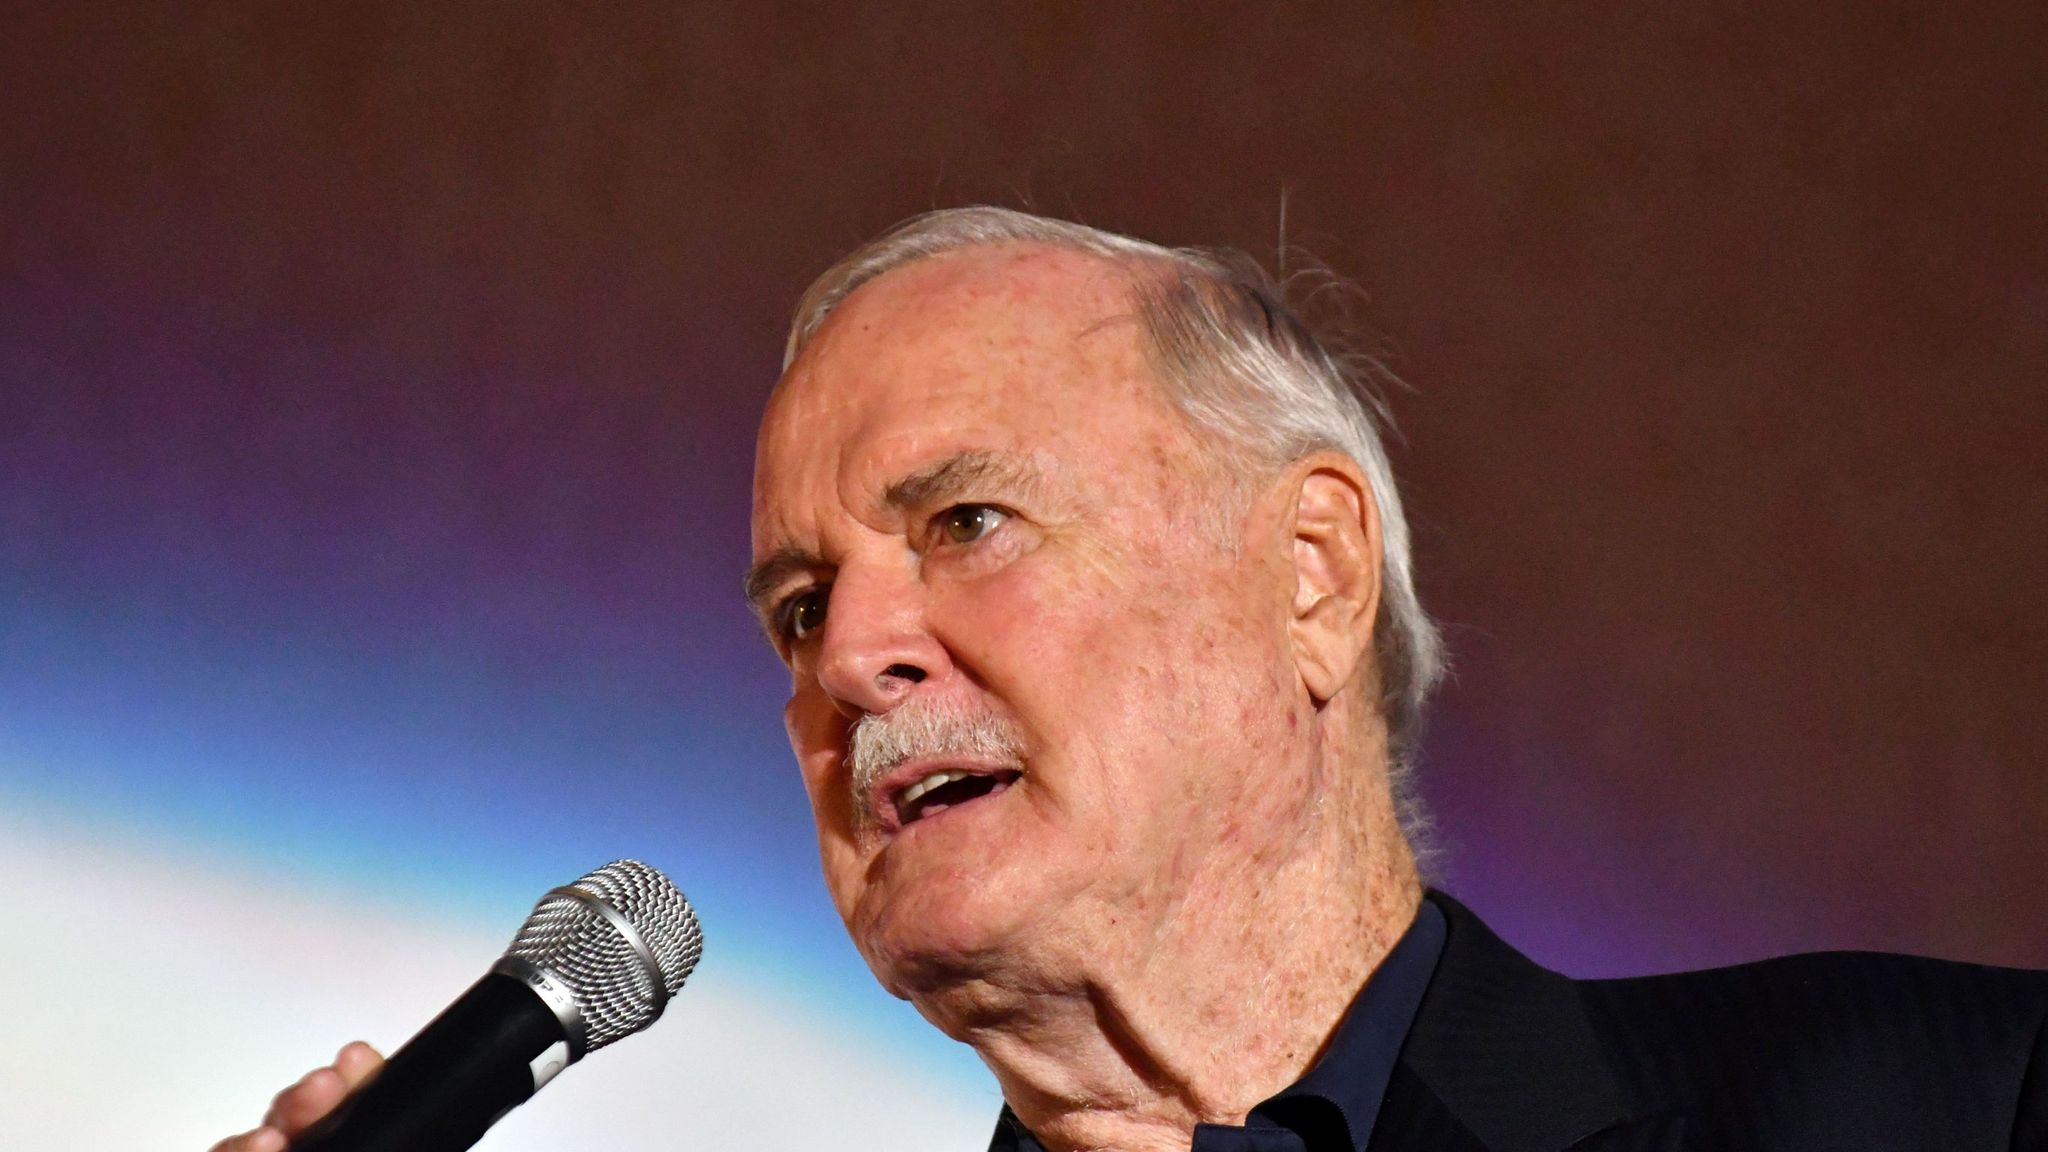 John Cleese under fire for 'London not English' comment | Ents & Arts ...